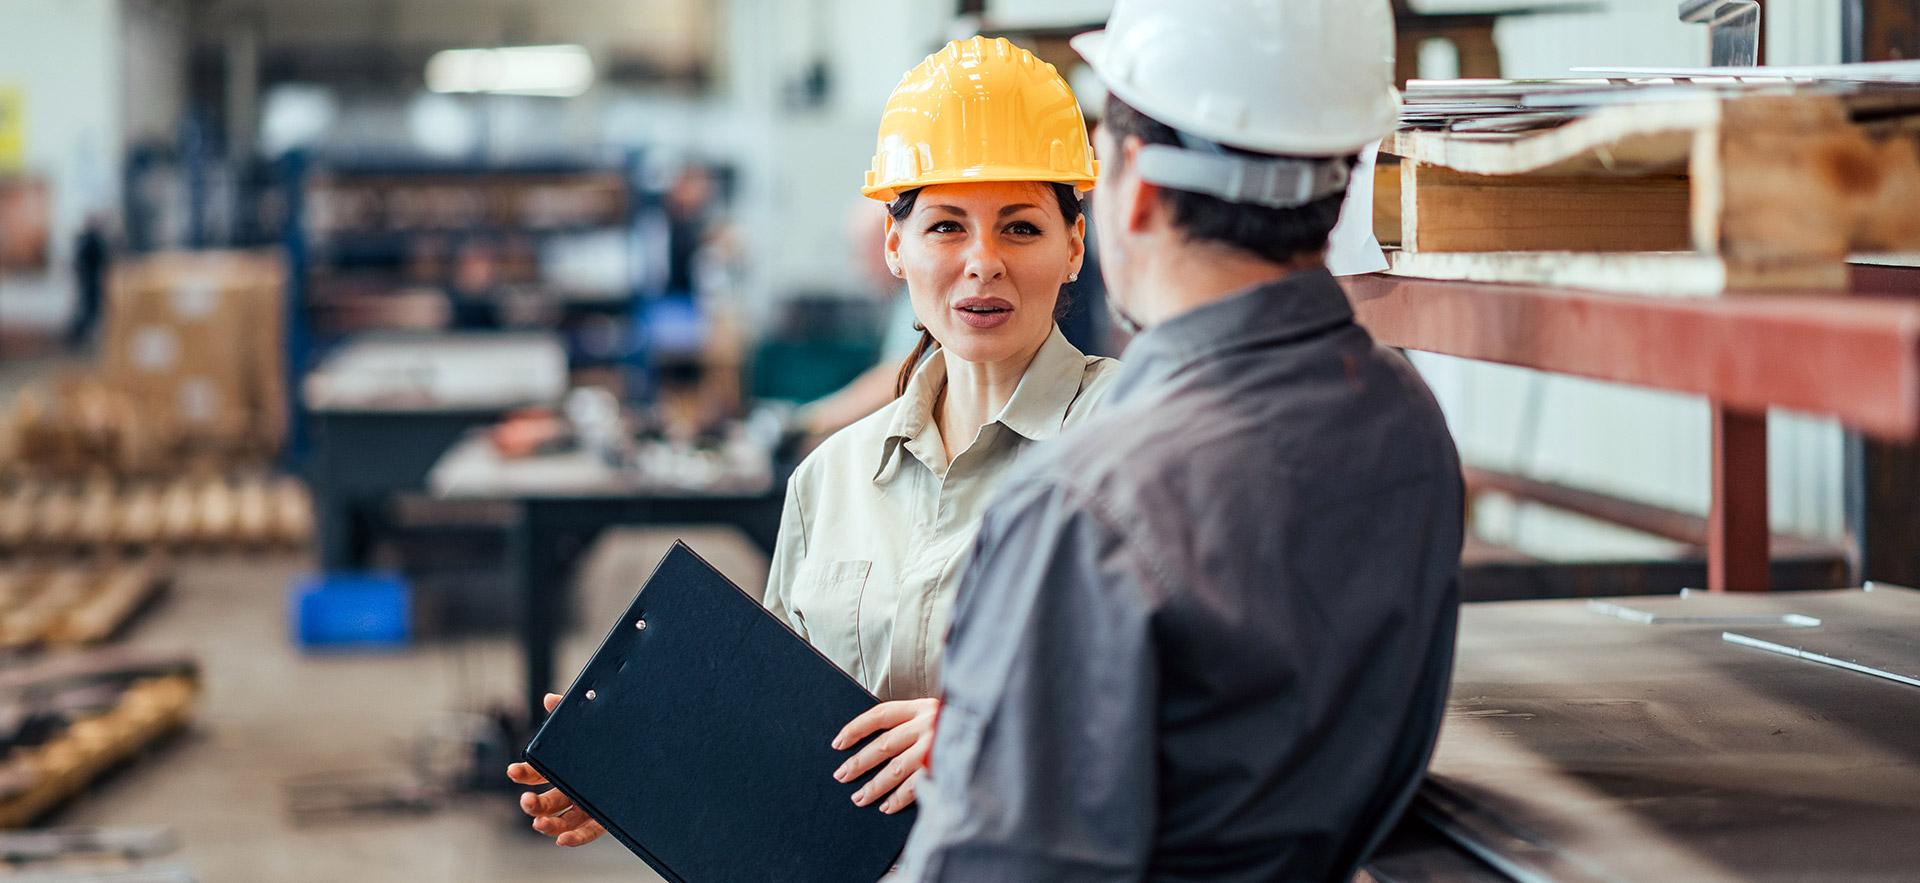 woman and man speaking in a manufacturing warehouse setting